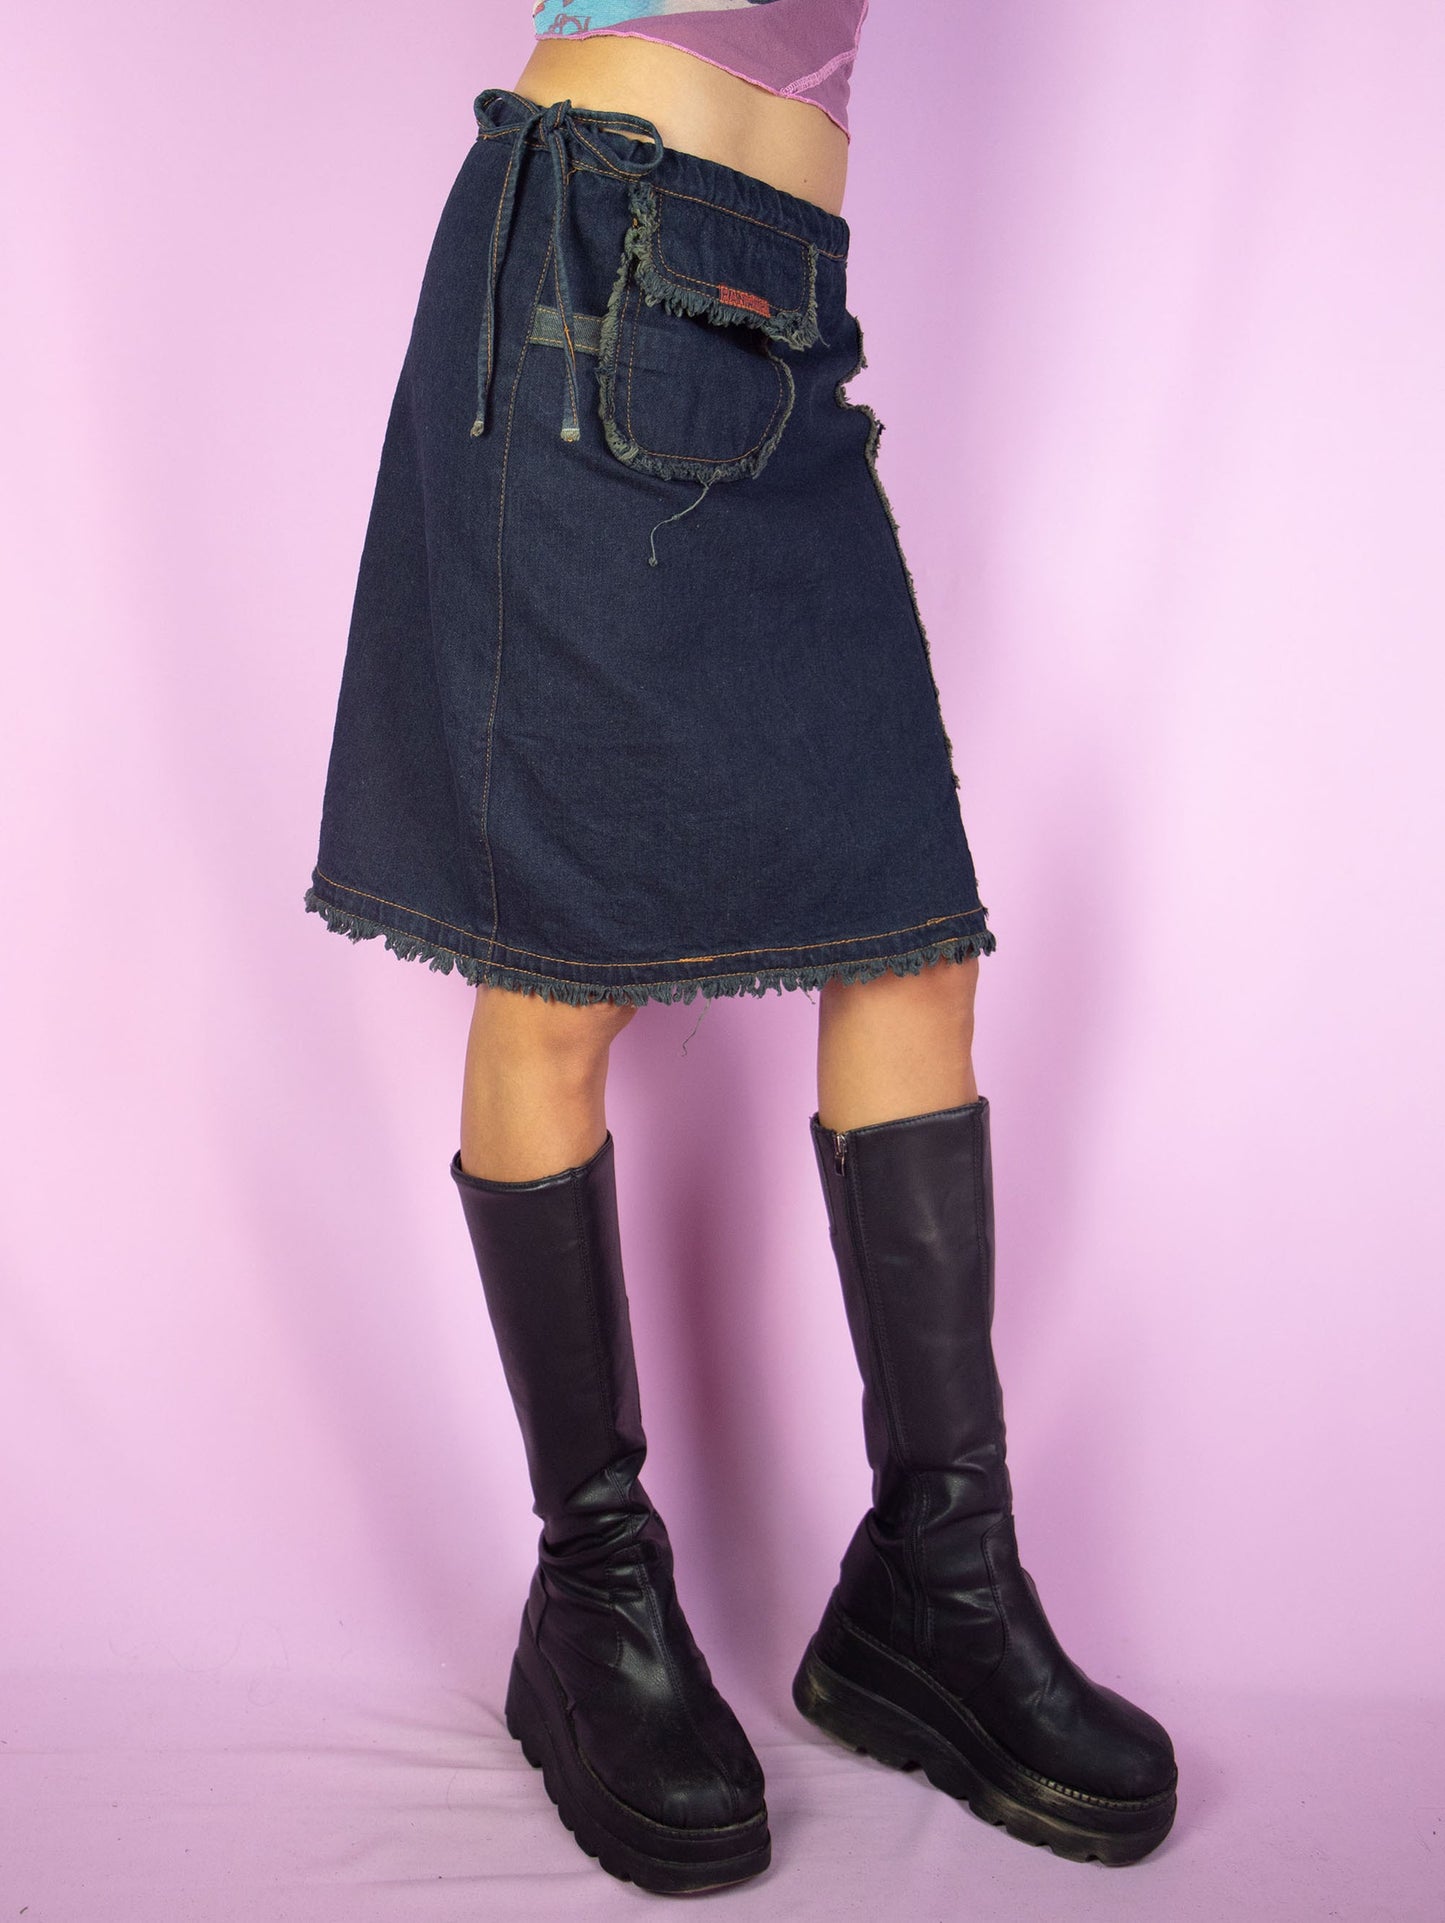 The Vintage Y2K Asymmetric Denim Mini Skirt is a dark denim navy blue skirt tied at the side with a pocket and frayed seam details. Cute cyber goth grunge gorpcore utility cargo deconstructed mini skirt circa 2000's.